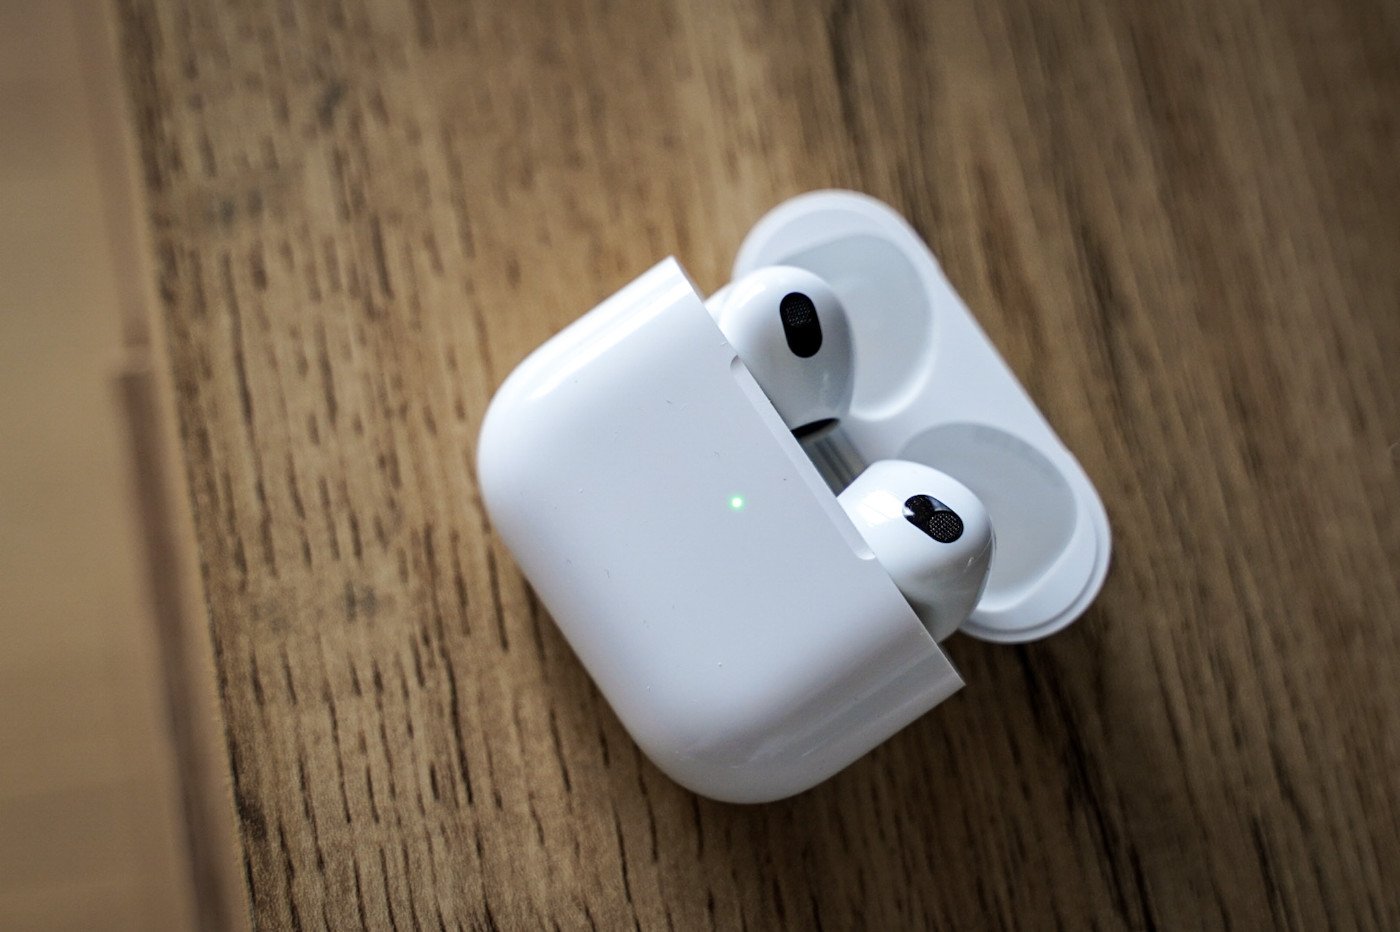 https://www.iphon.fr/app/uploads/2021/11/airpods-3-comparatif-differences.jpg